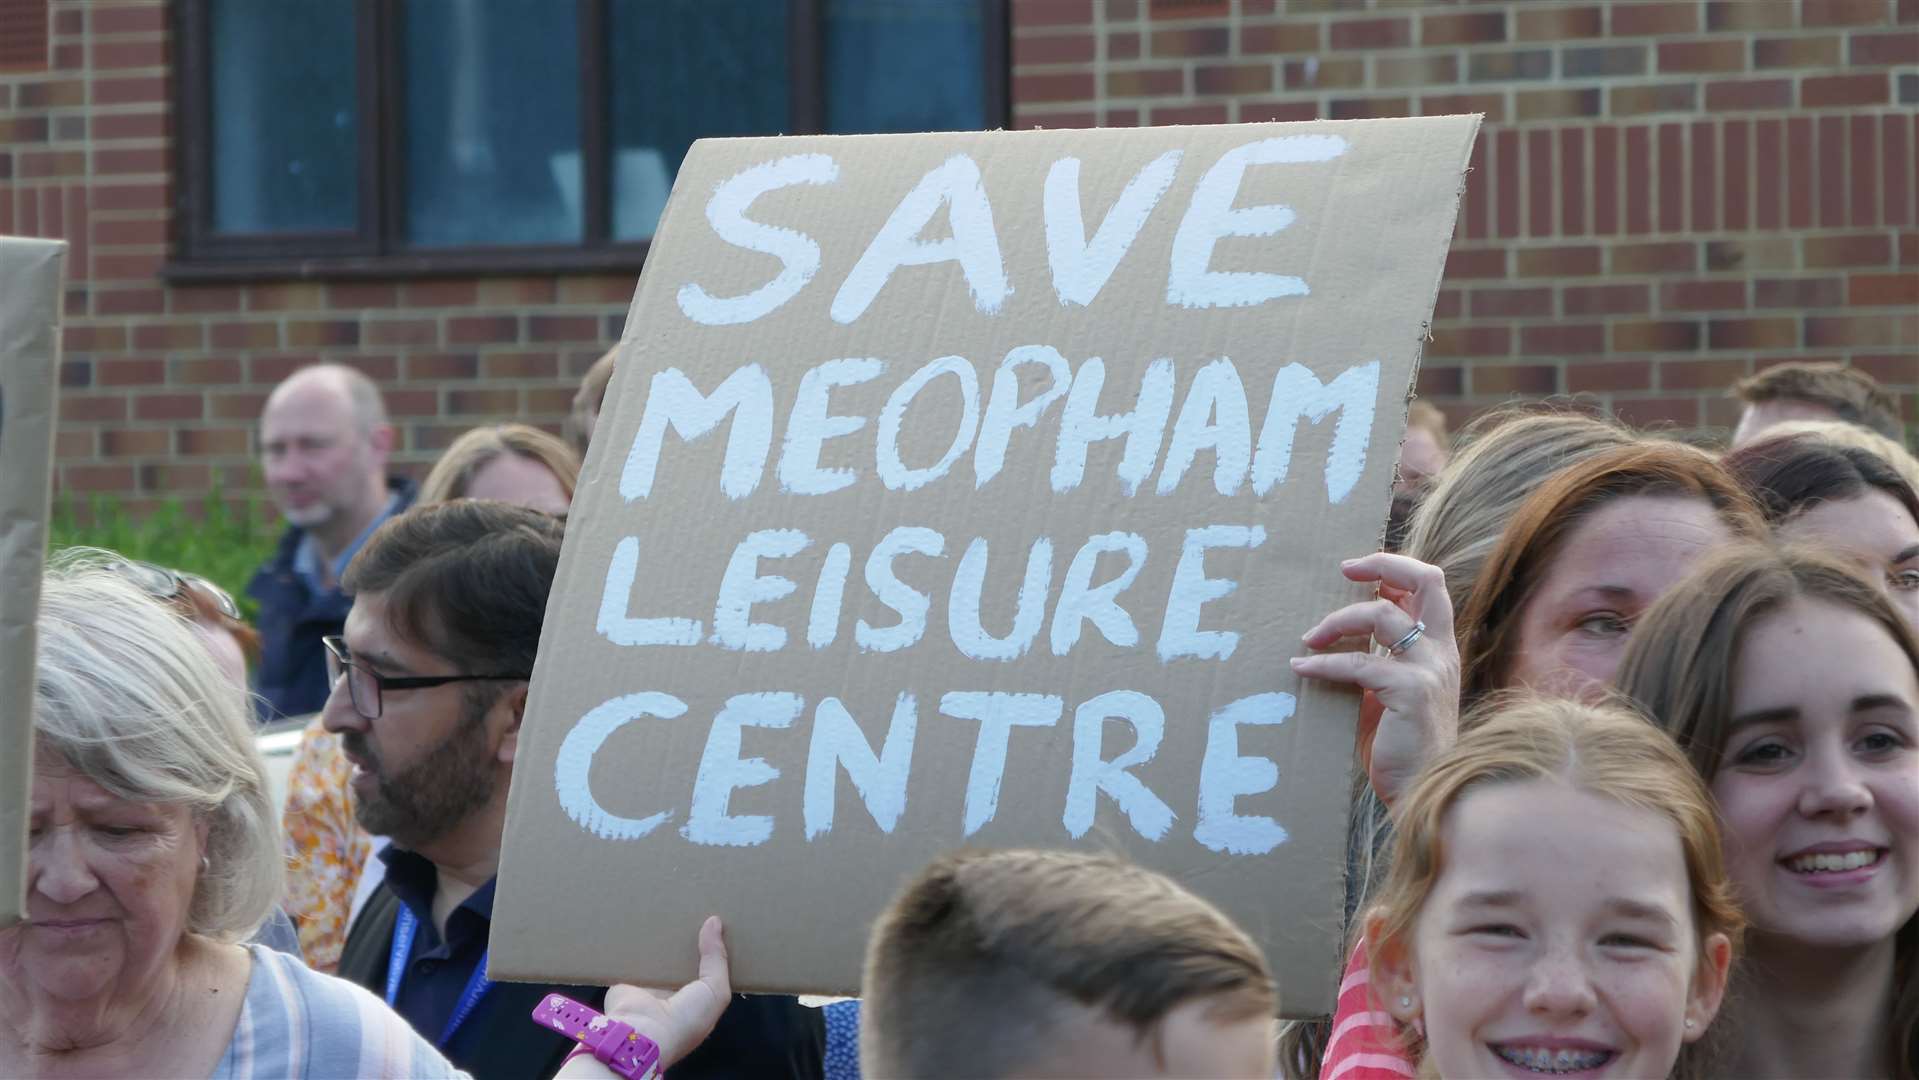 The centre could close by the end of the month if an agreement cannot be reached. Photo: Anna Roberts